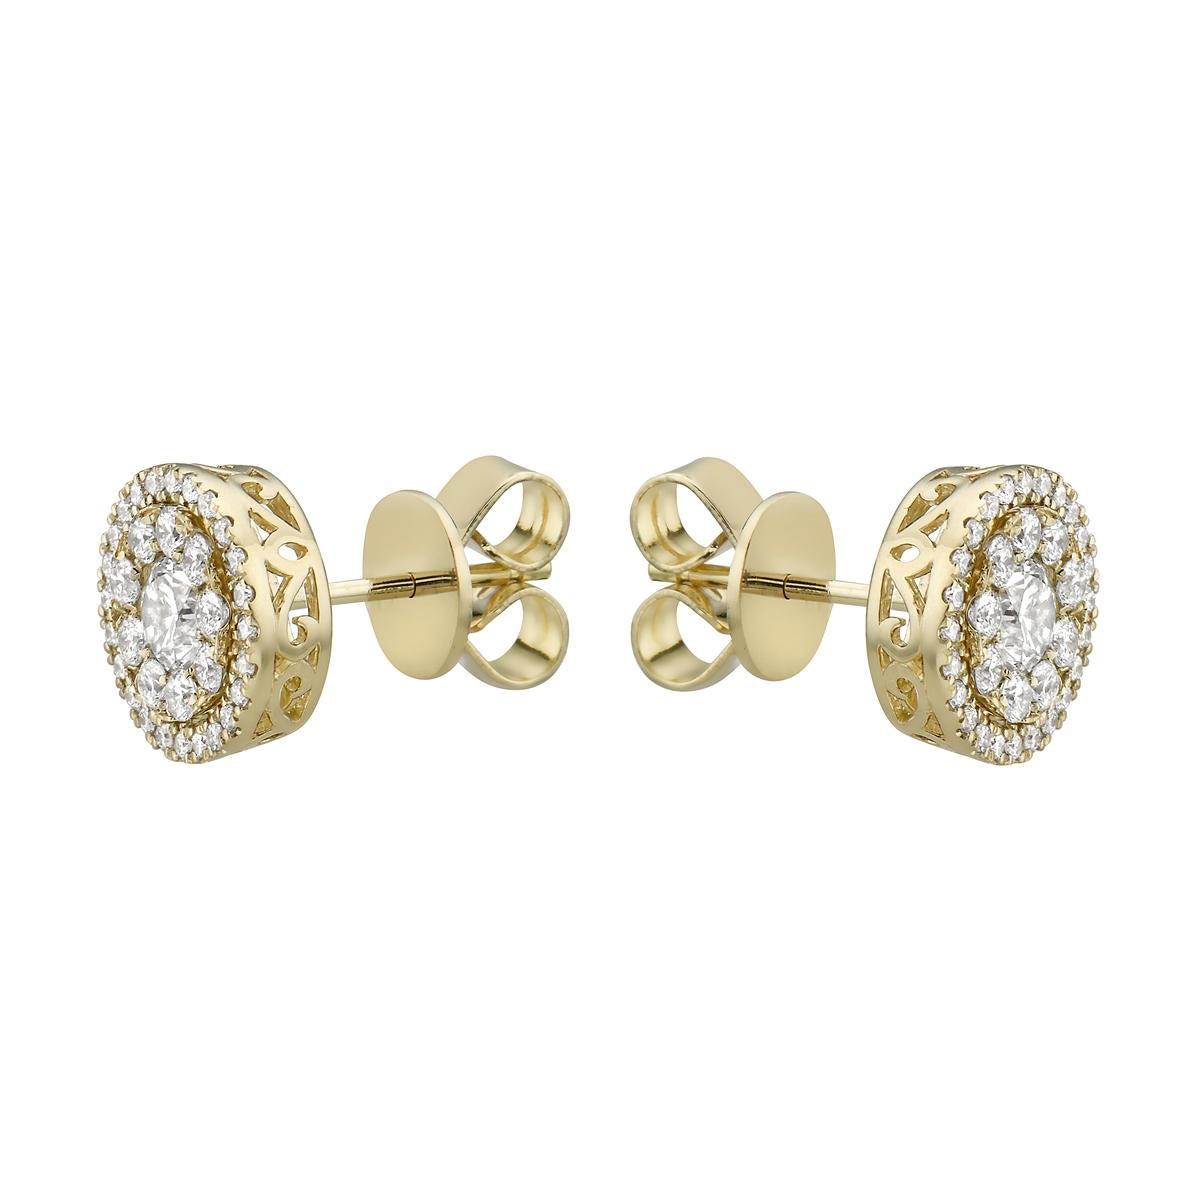 With these exquisite two-way illusion and jacket studs, style and glamour are in the spotlight. These studs are set in 18-carat gold, made out of 3.3 grams of gold. The color of the diamonds is G. The clarity is VS2-SI1. It is made out of 68